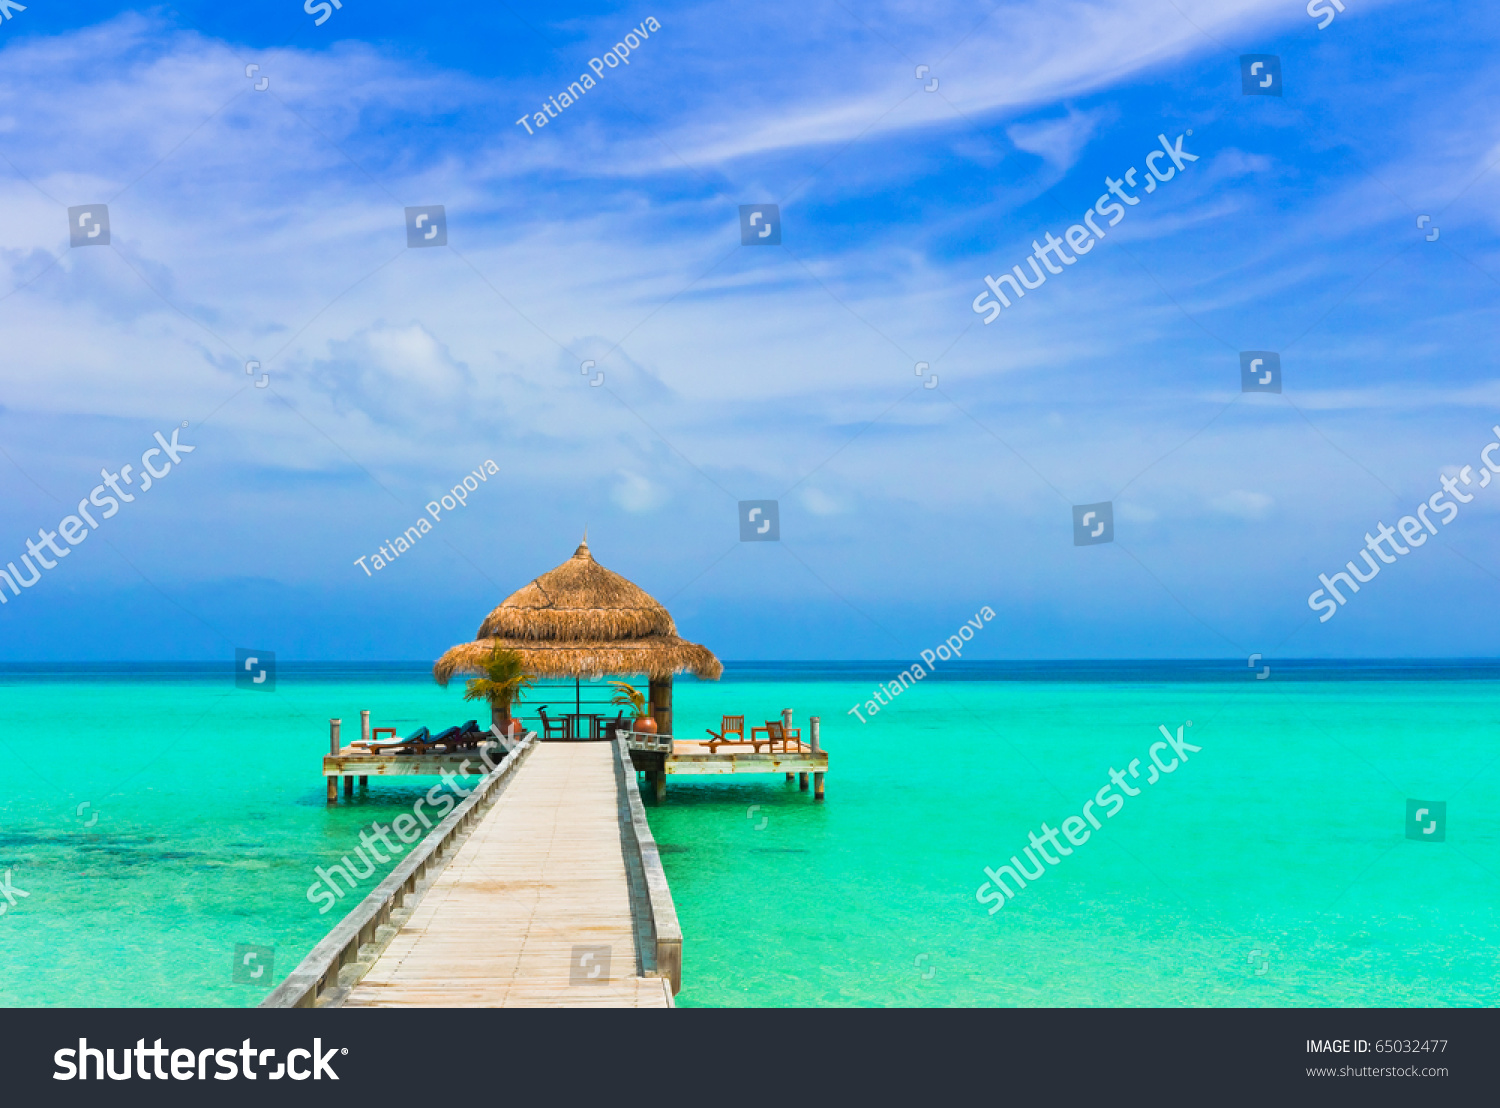 Water Cafe On Beach Pathway Stock Photo 65032477 | Shutterstock